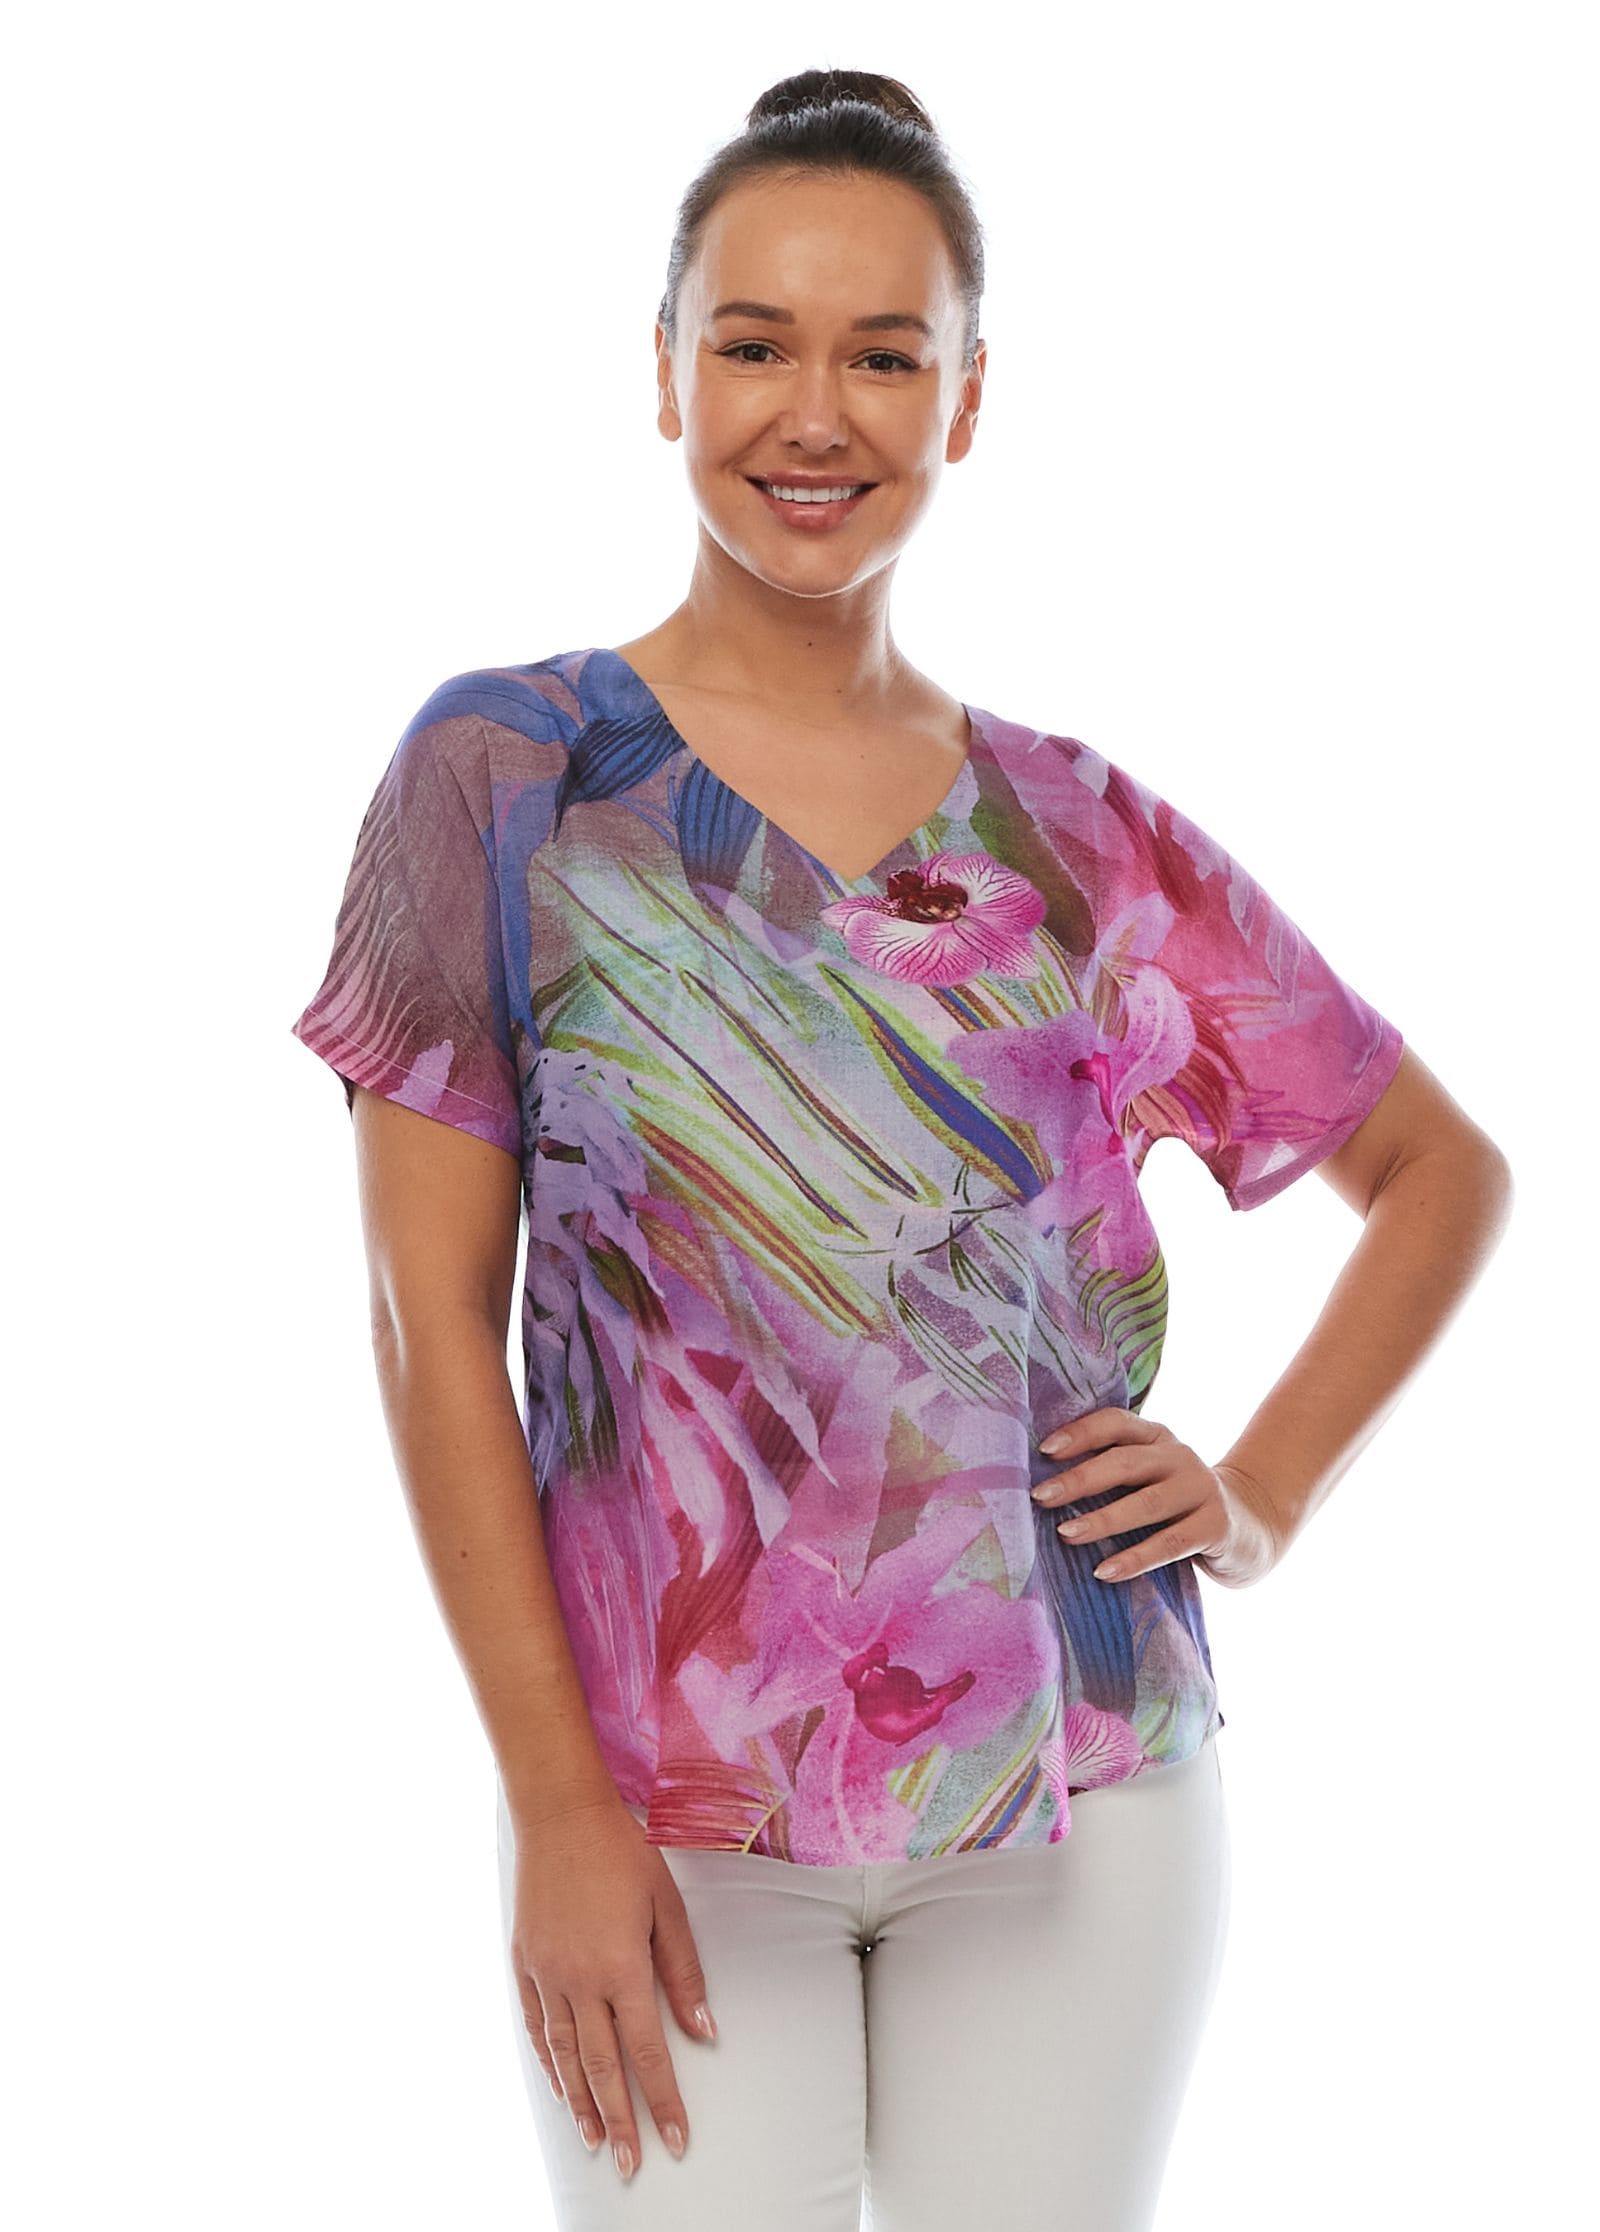 Claire Powell | Orchid - Short Sleeve Tops | Plus Size Clothing for Women